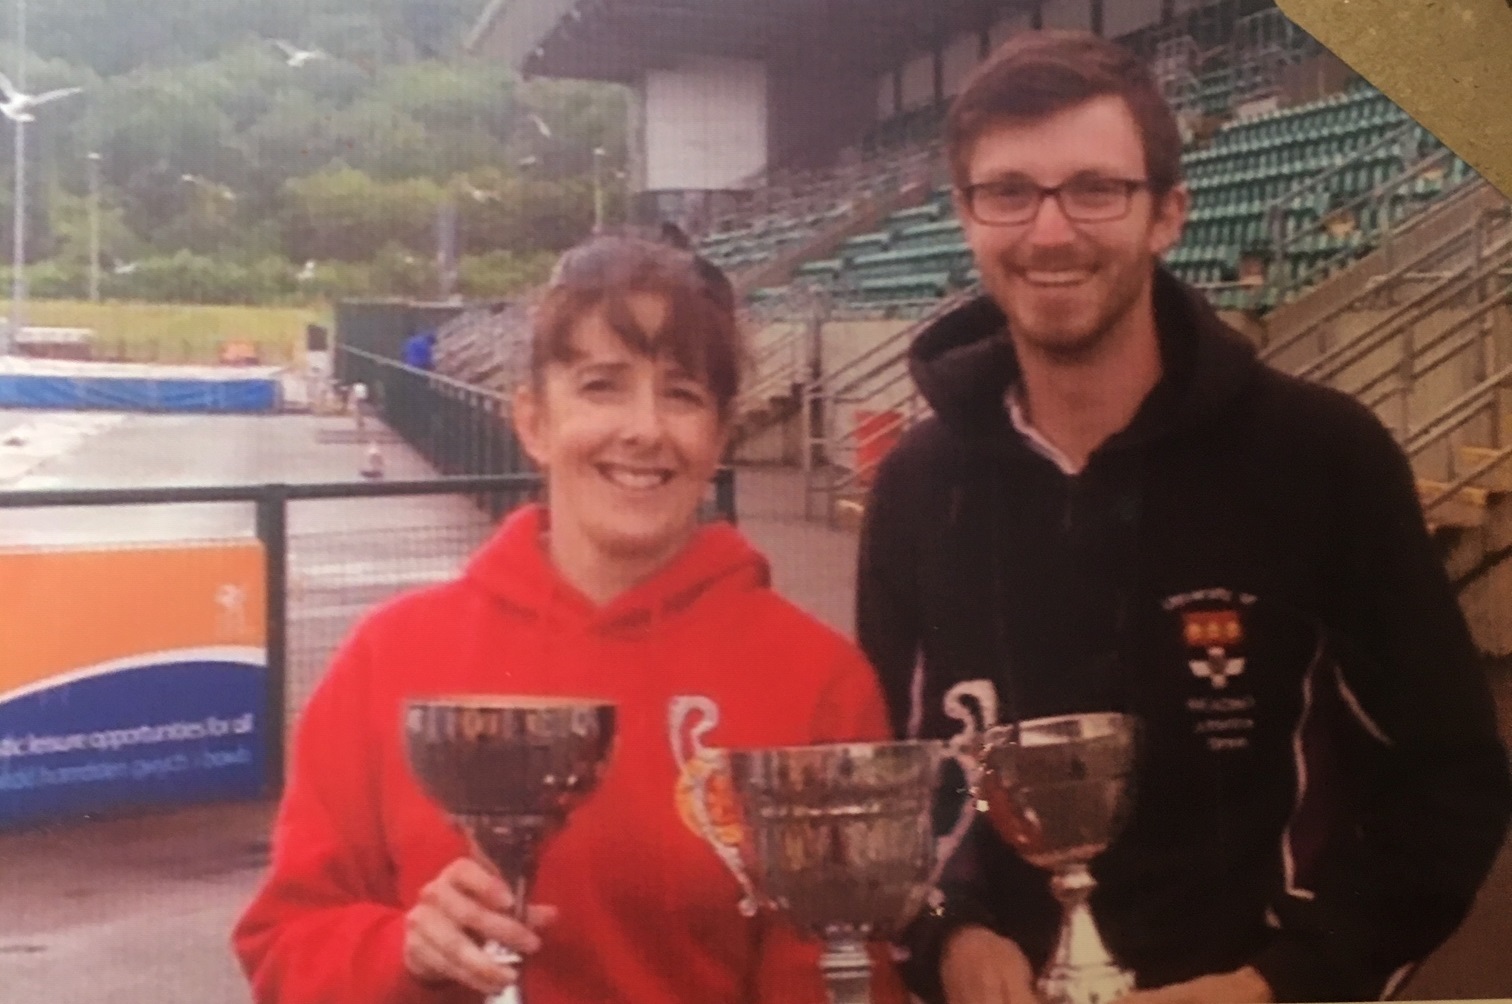 Giovanna Cavalli led St Davids RC Primary and Nursery School to many successes at the annual Catholic Athletic competition at Leckwith Stadium. Picture: Family photo